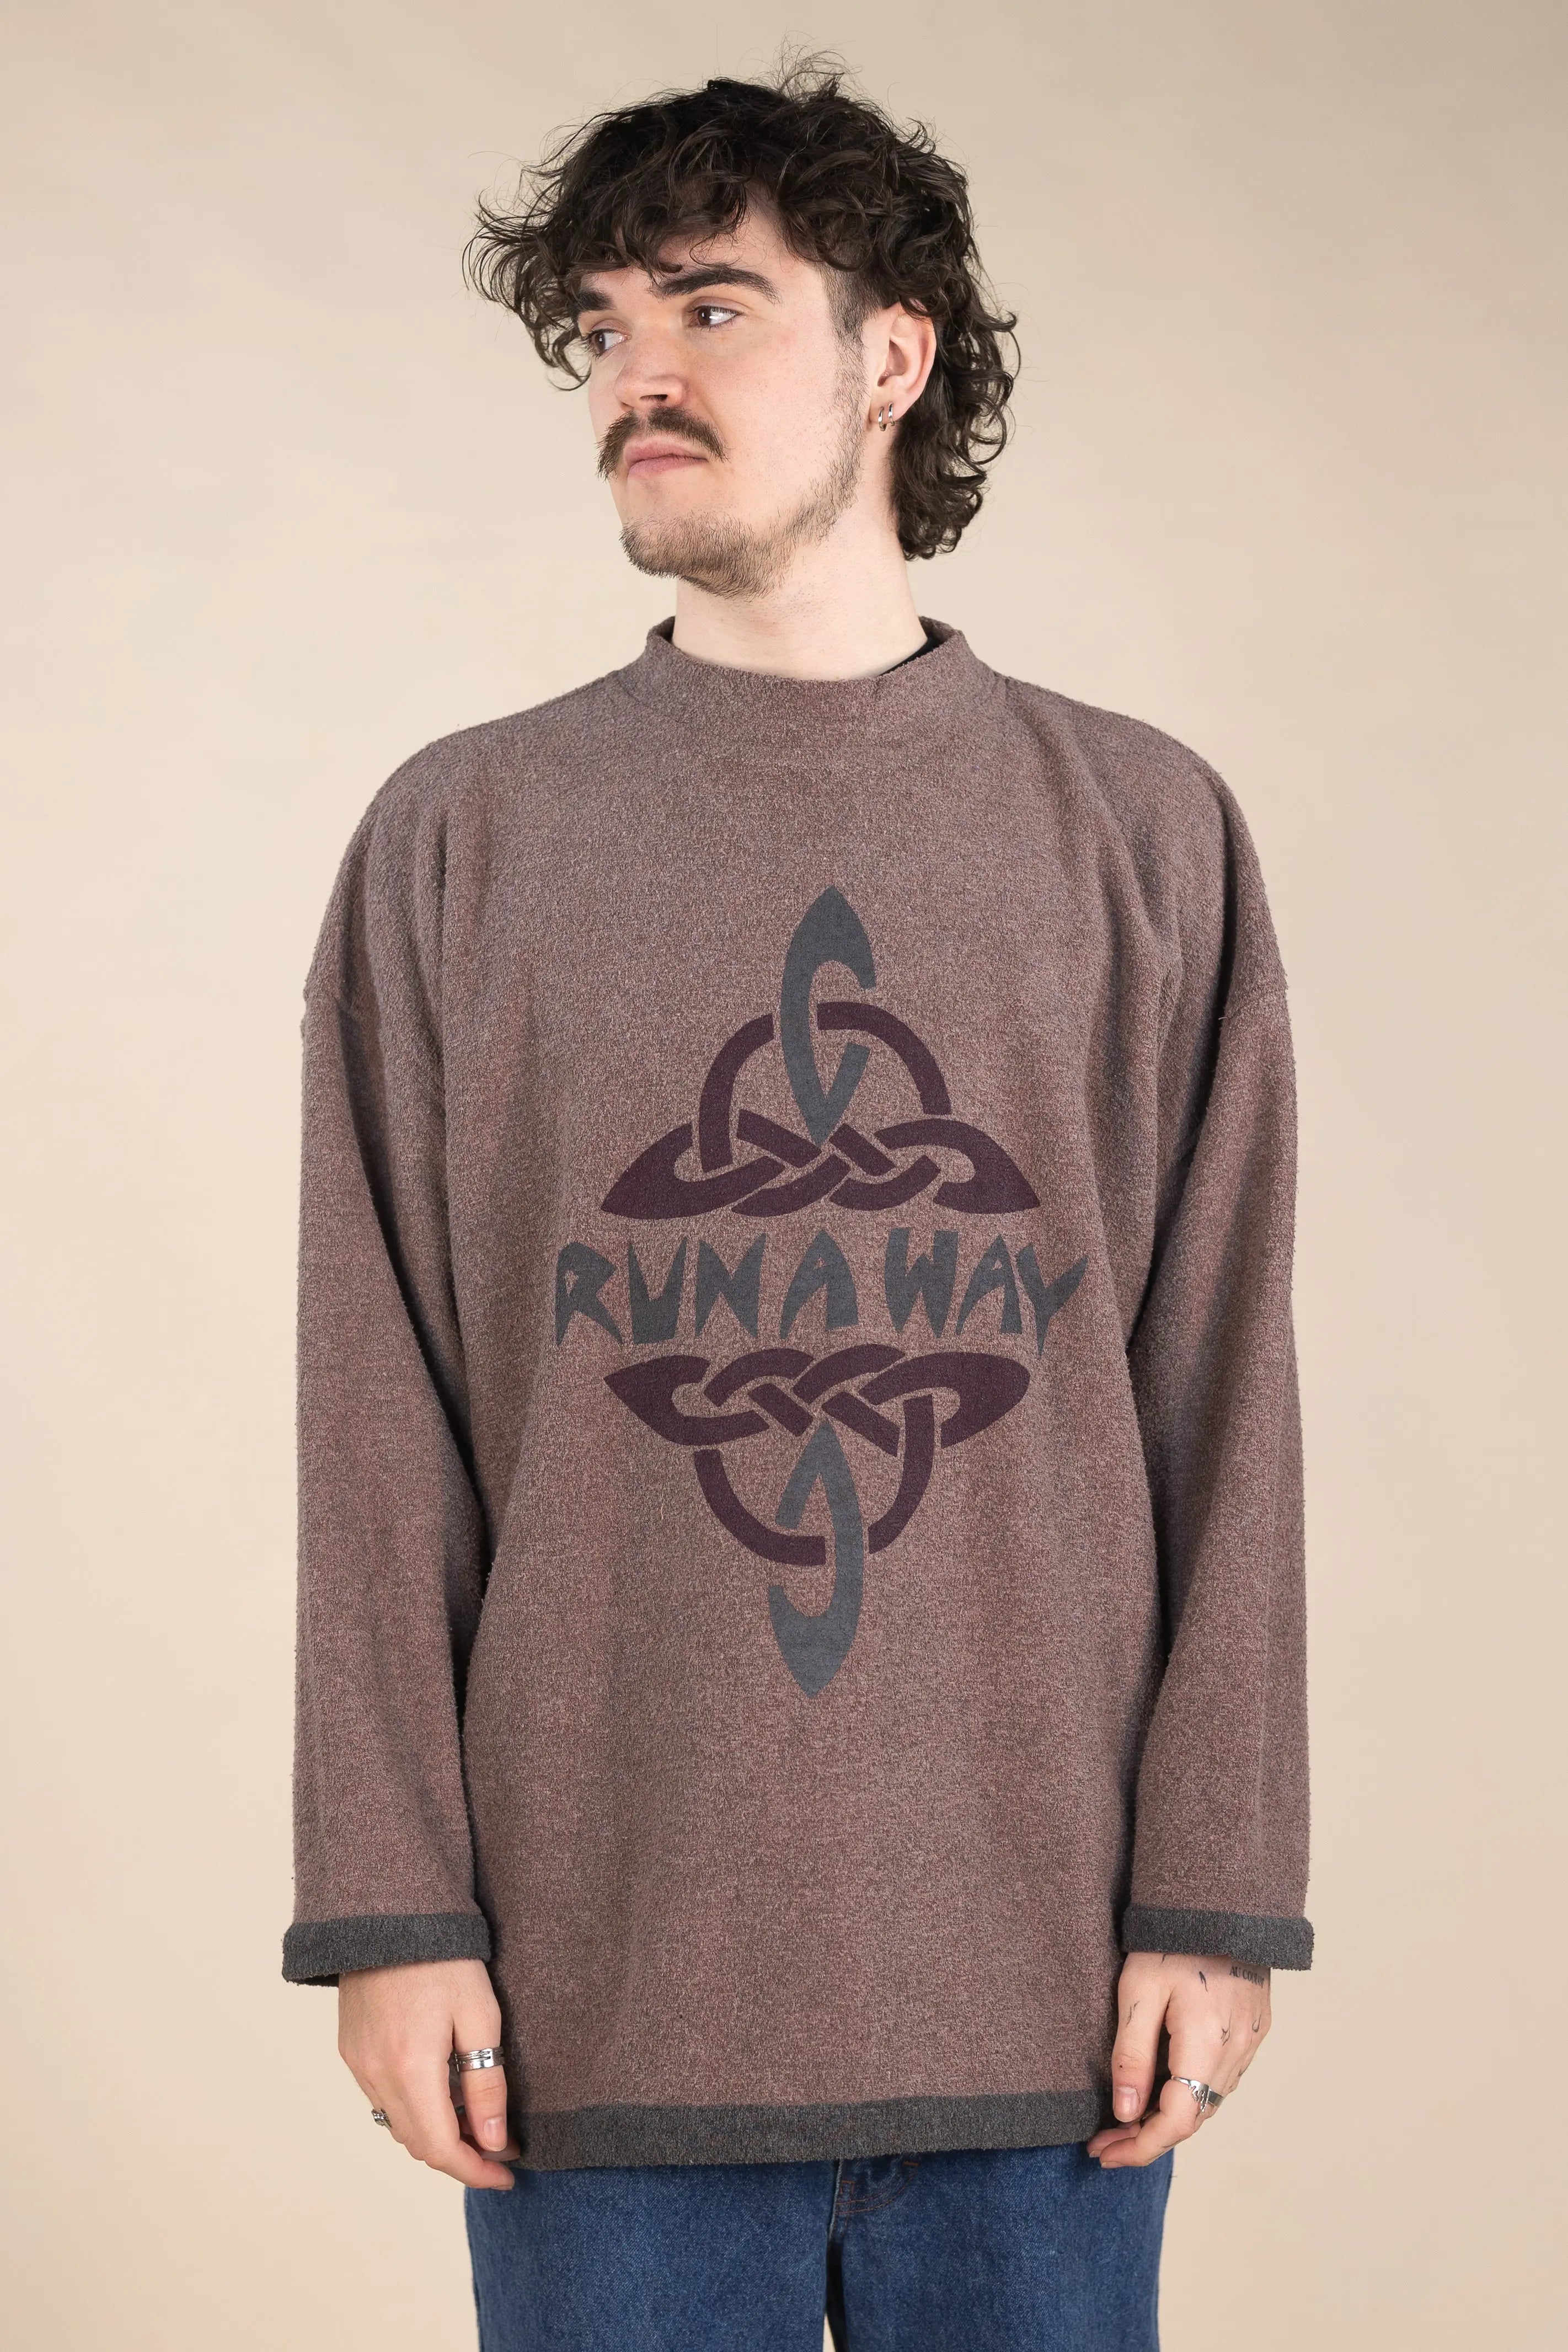 Runaway - 00s Fleece Jumper- ThriftTale.com - Vintage and second handclothing